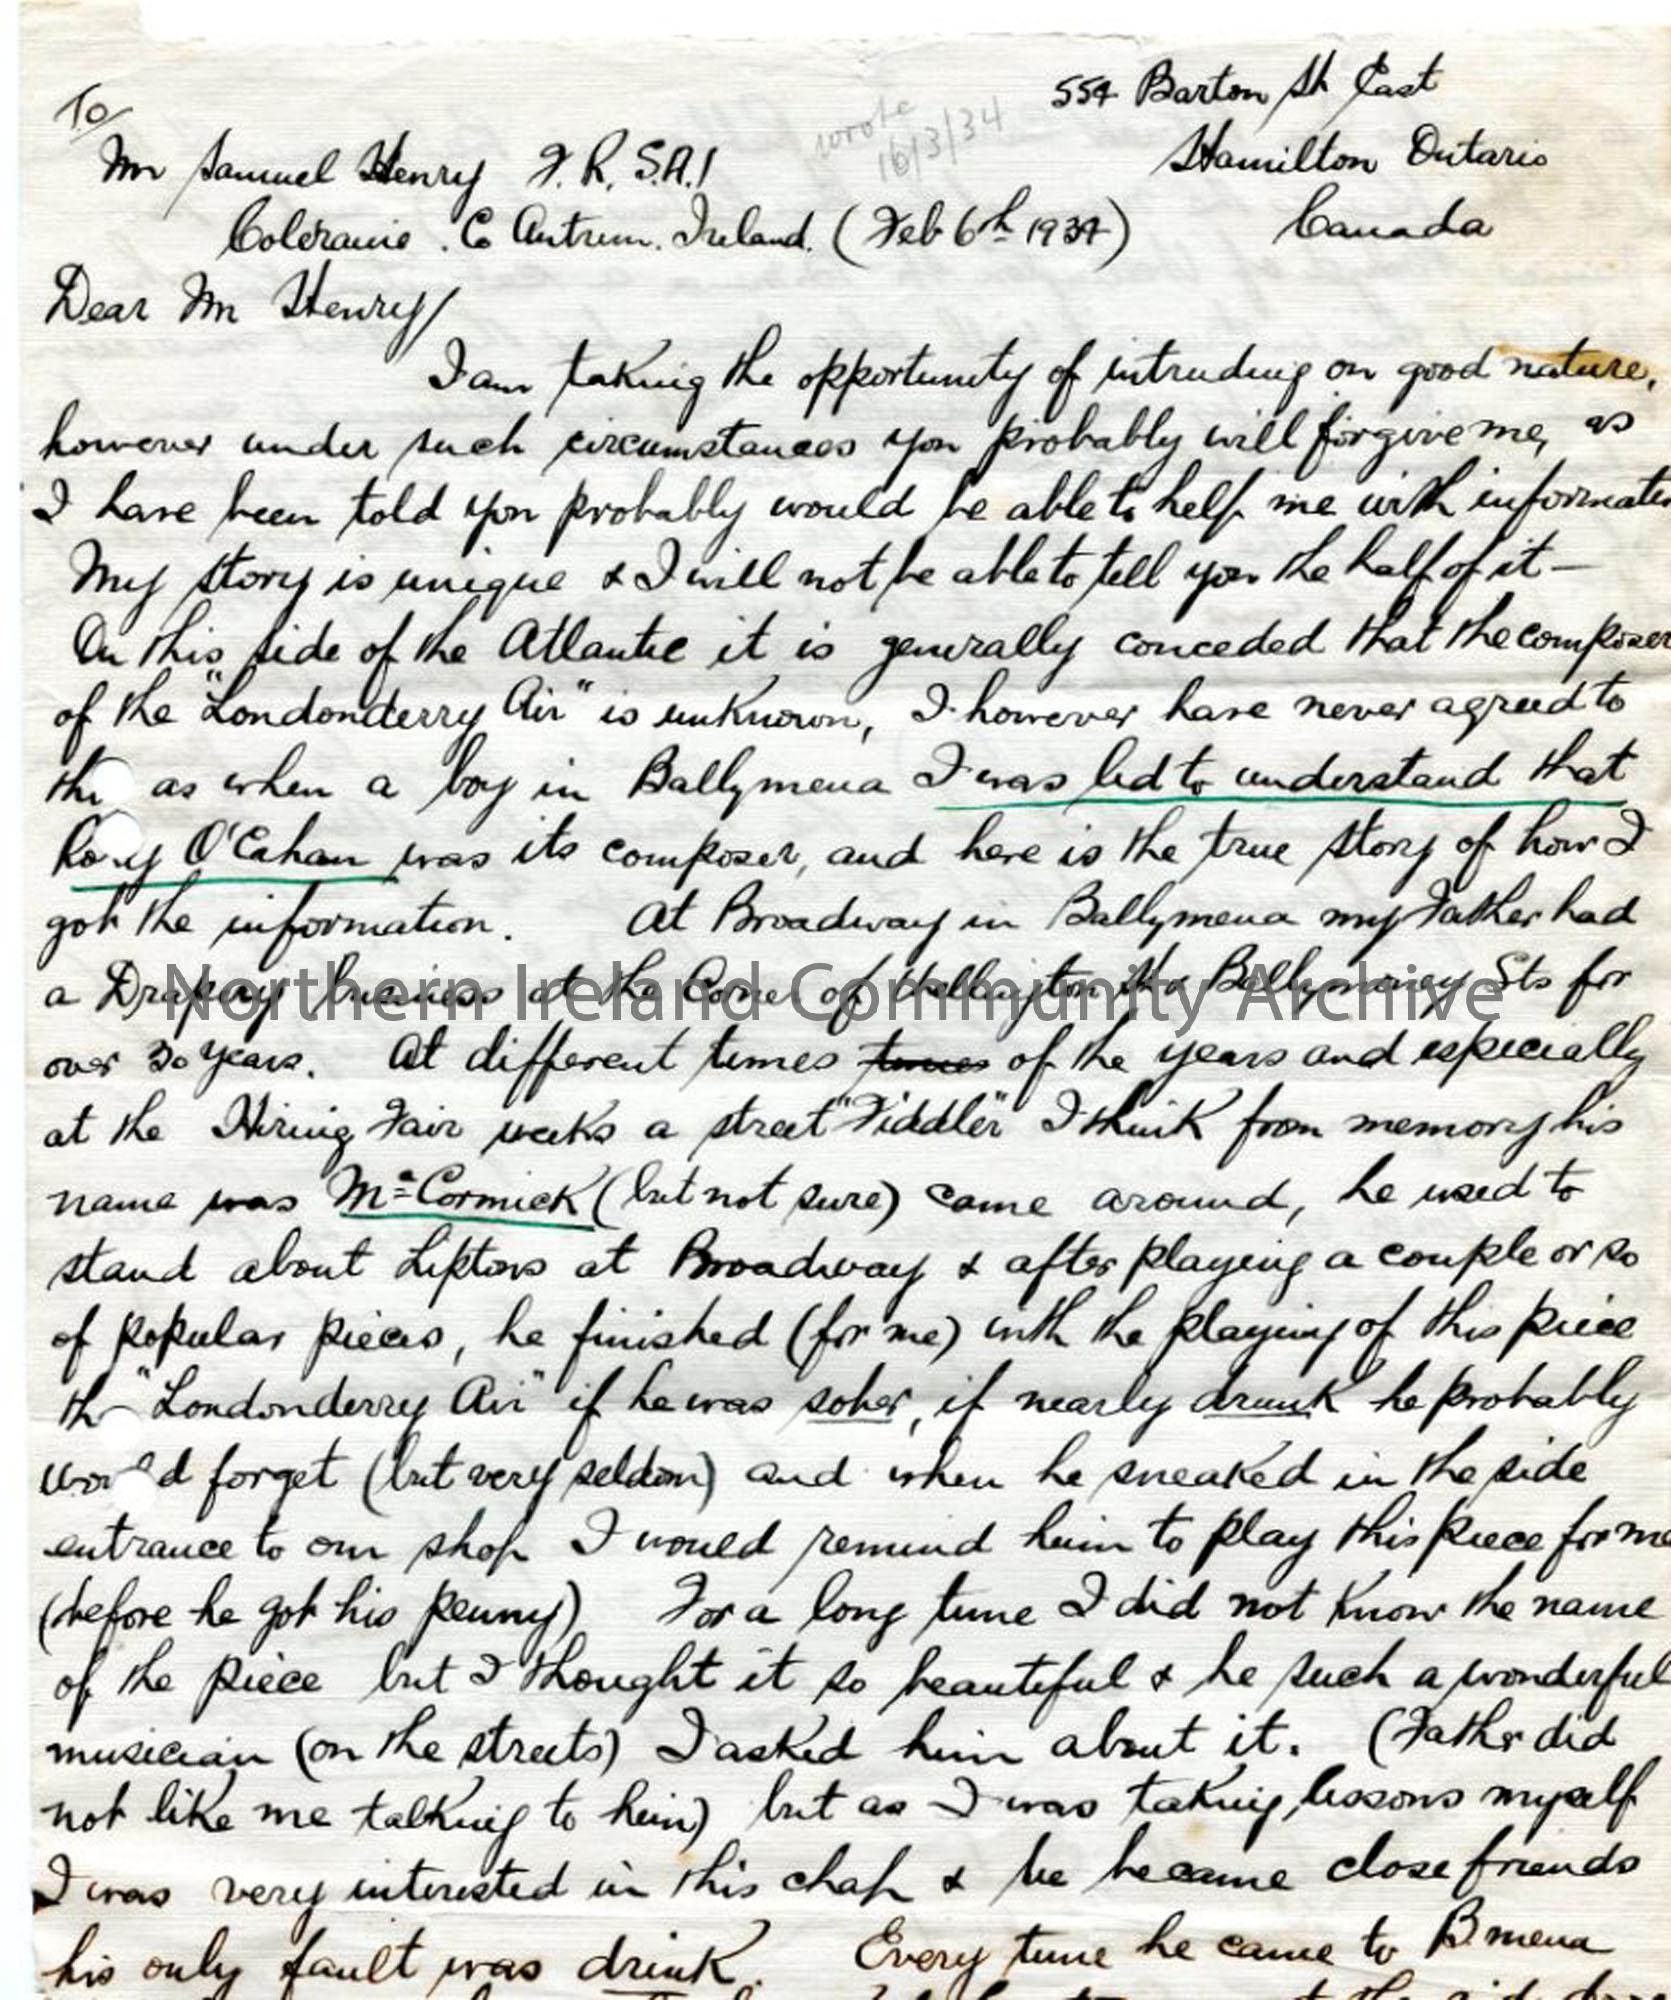 Page one of three – Letter from Frank Thomson, re: Londonderry Air